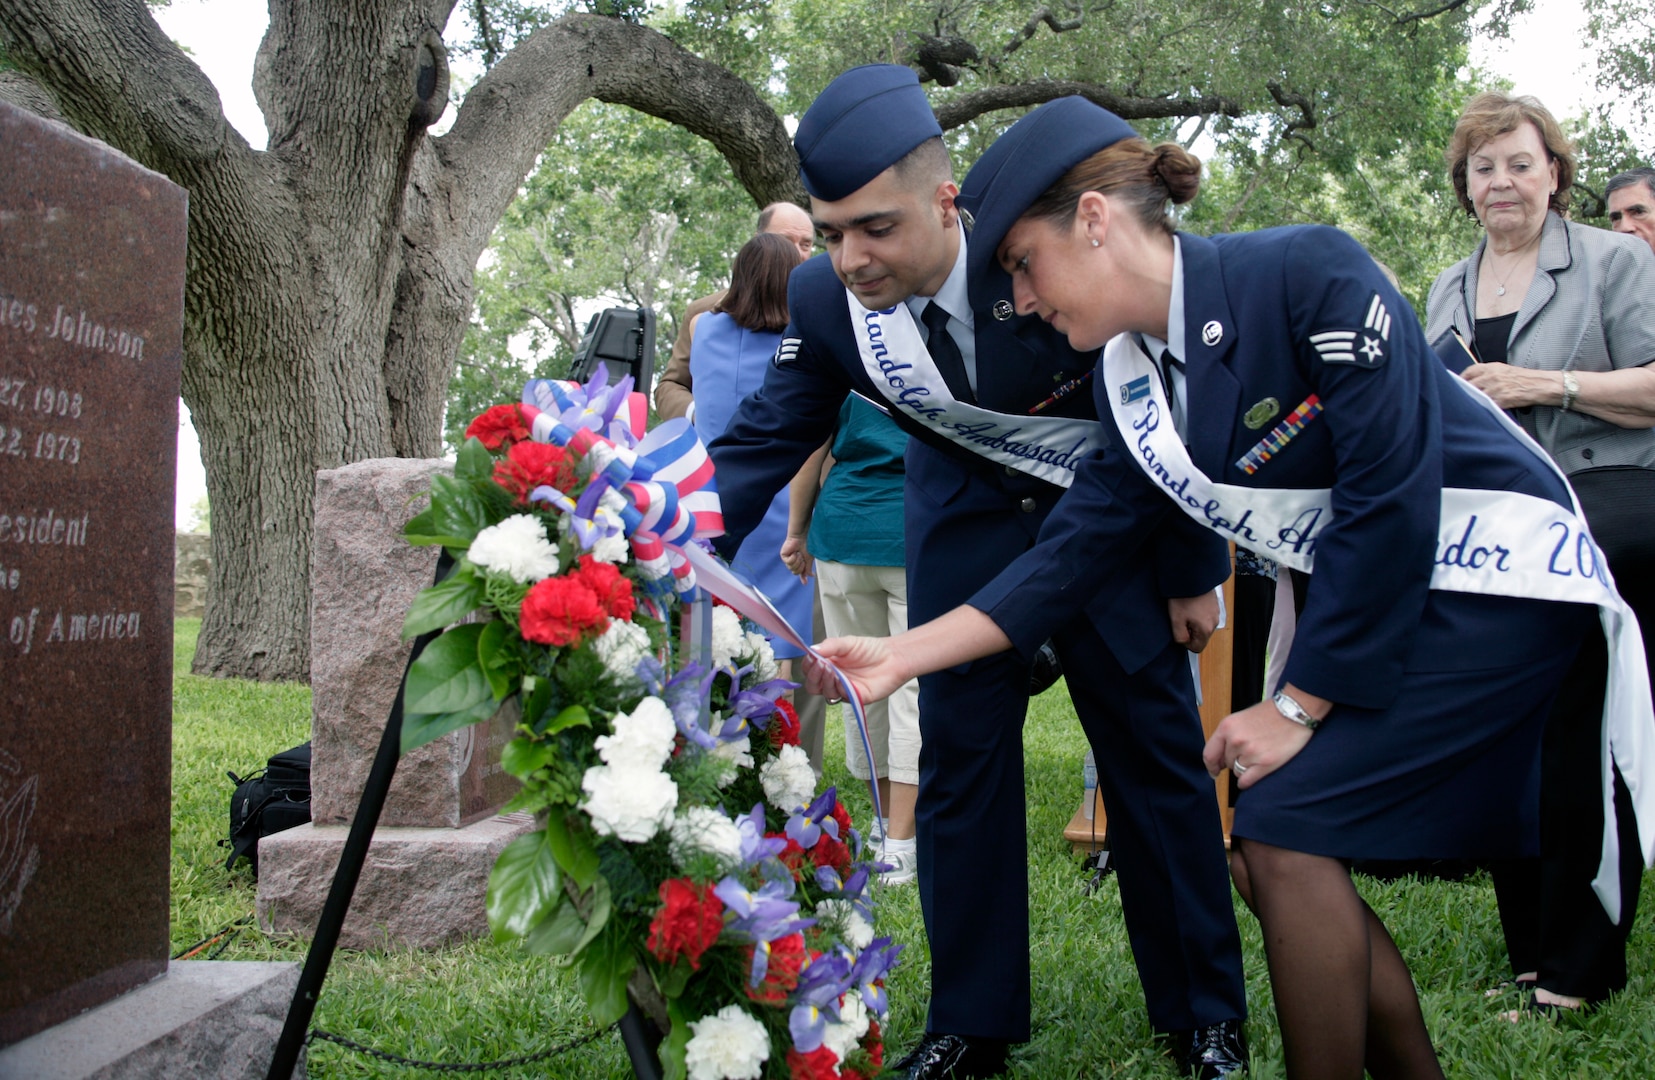 Senior Airmen Vikas Kumar and Jennifer Booth, both Randolph Air Force Base Ambassadors, straighten the wreath laid on the grave of President Lyndon B. Johnson Aug. 27. As the military commander closest to the ranch, the 12th FTW commander represents the sitting president each year by placing a wreath at President Johnson's grave on his birthday. (U.S. Air Force photo by Dan Solis)